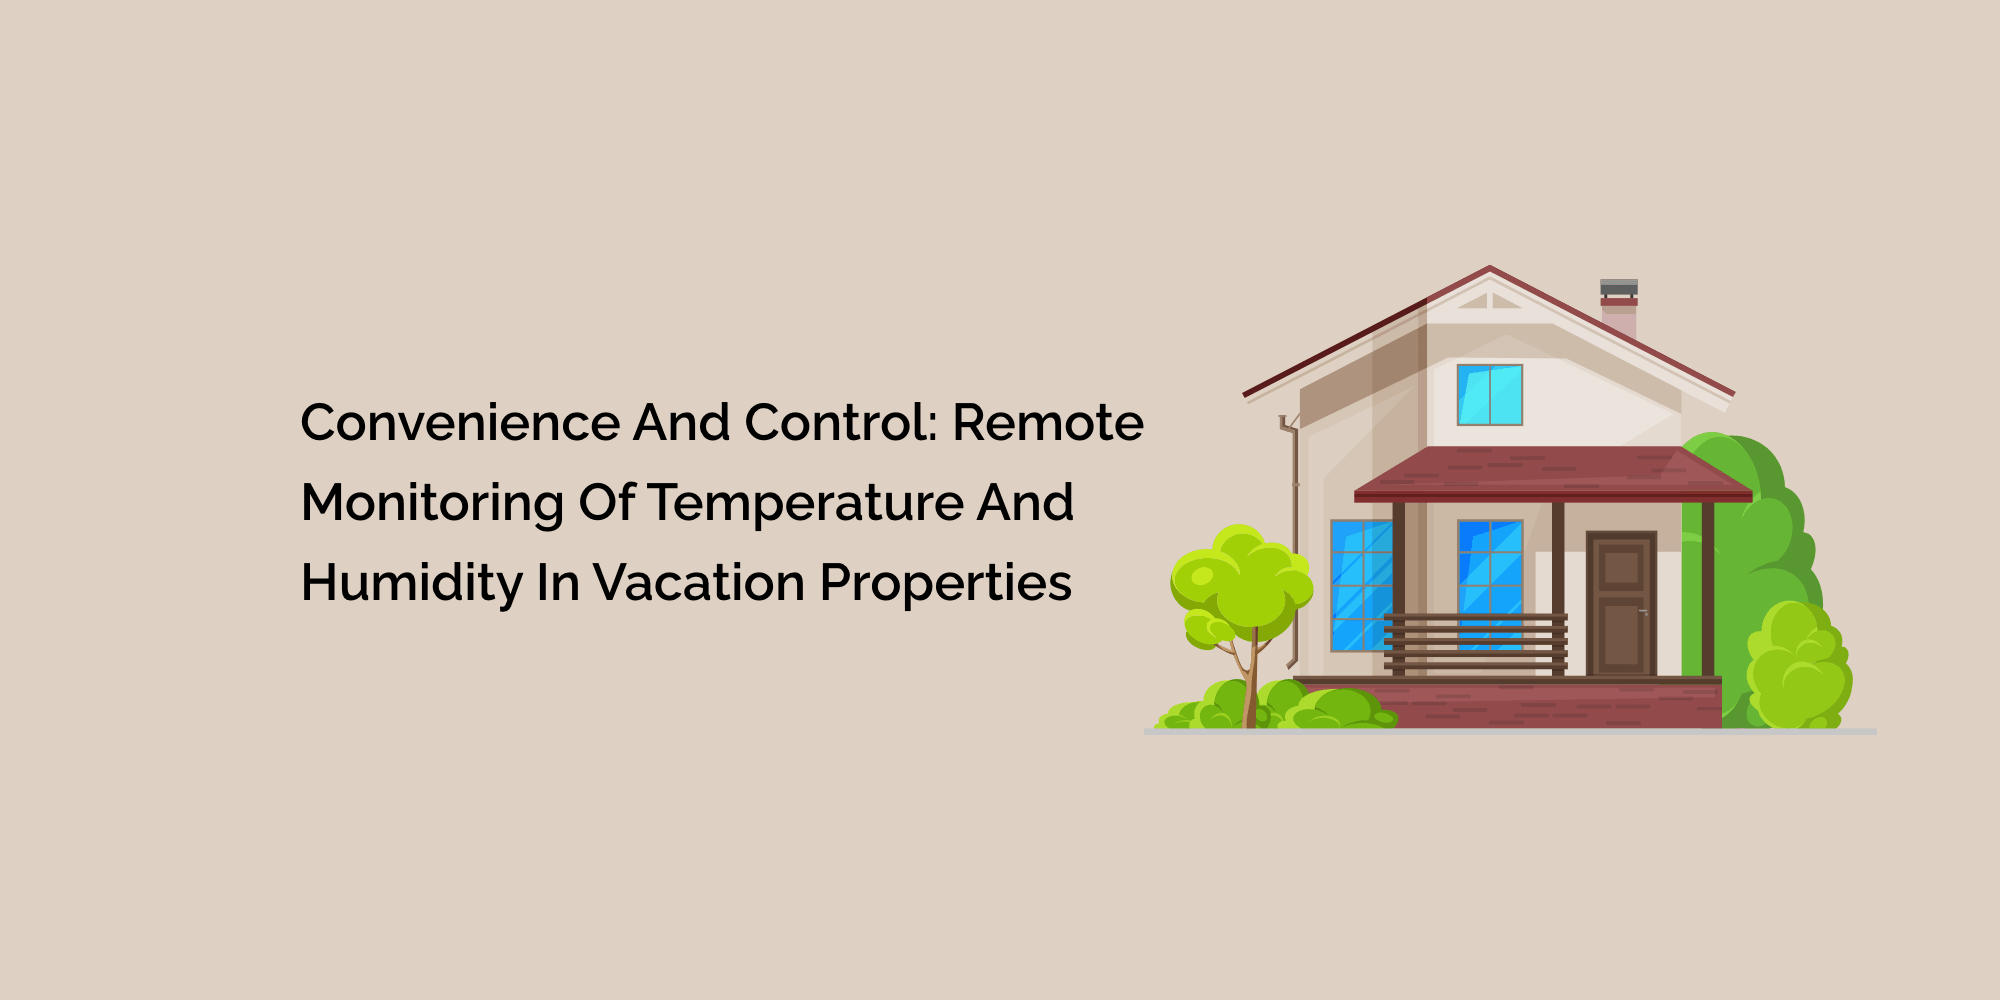 Convenience and Control: Remote Monitoring of Temperature and Humidity in Vacation Properties